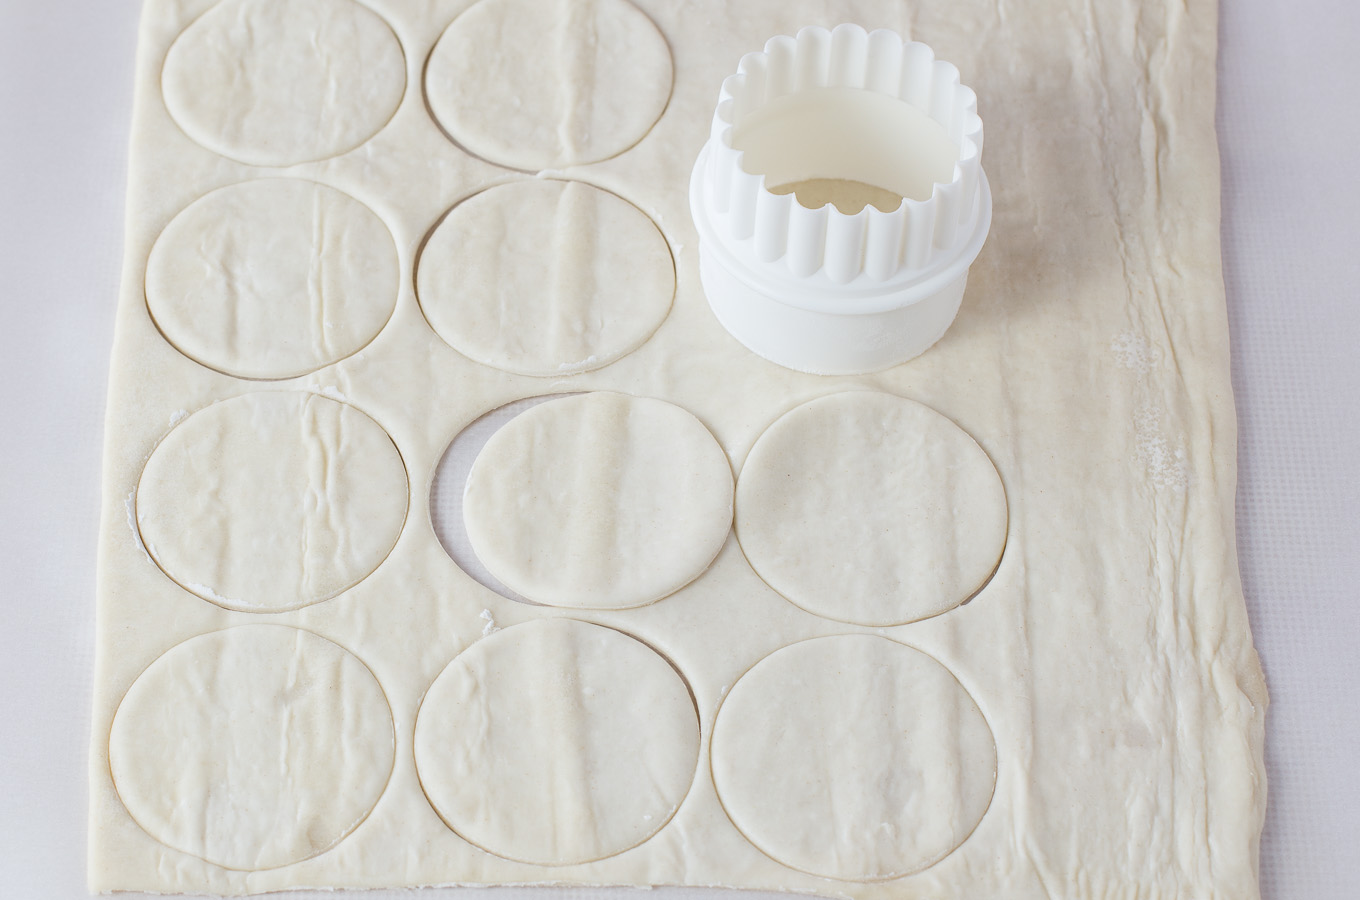 Sheet of puffed pastry cut out with circle cookie cutter.